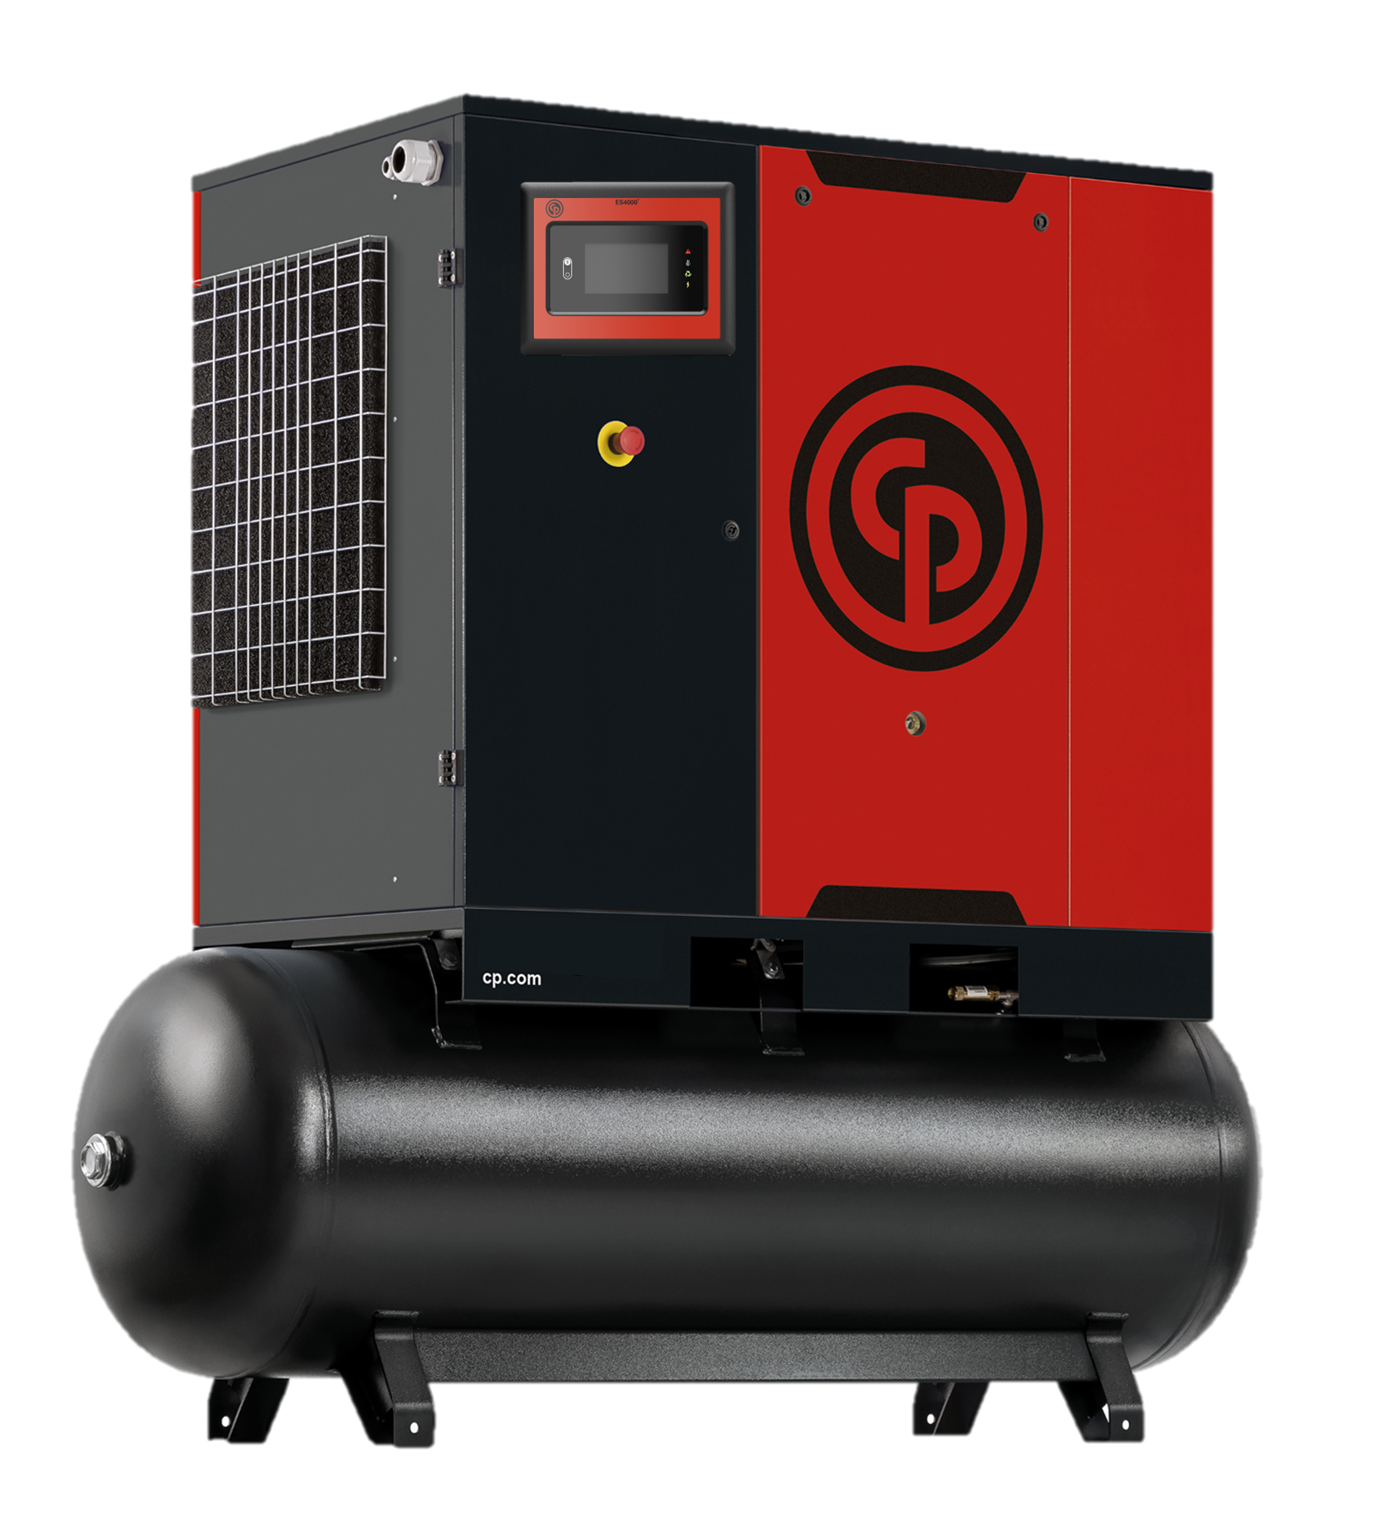 Chicago Pneumatic CPBg 25 HP Tank Mount w. Integrated Dryer Rotary Screw Air Compressor | 113.1 CFM@125 PSI, 208-230/460 volt, 3 Phase | 4152030677